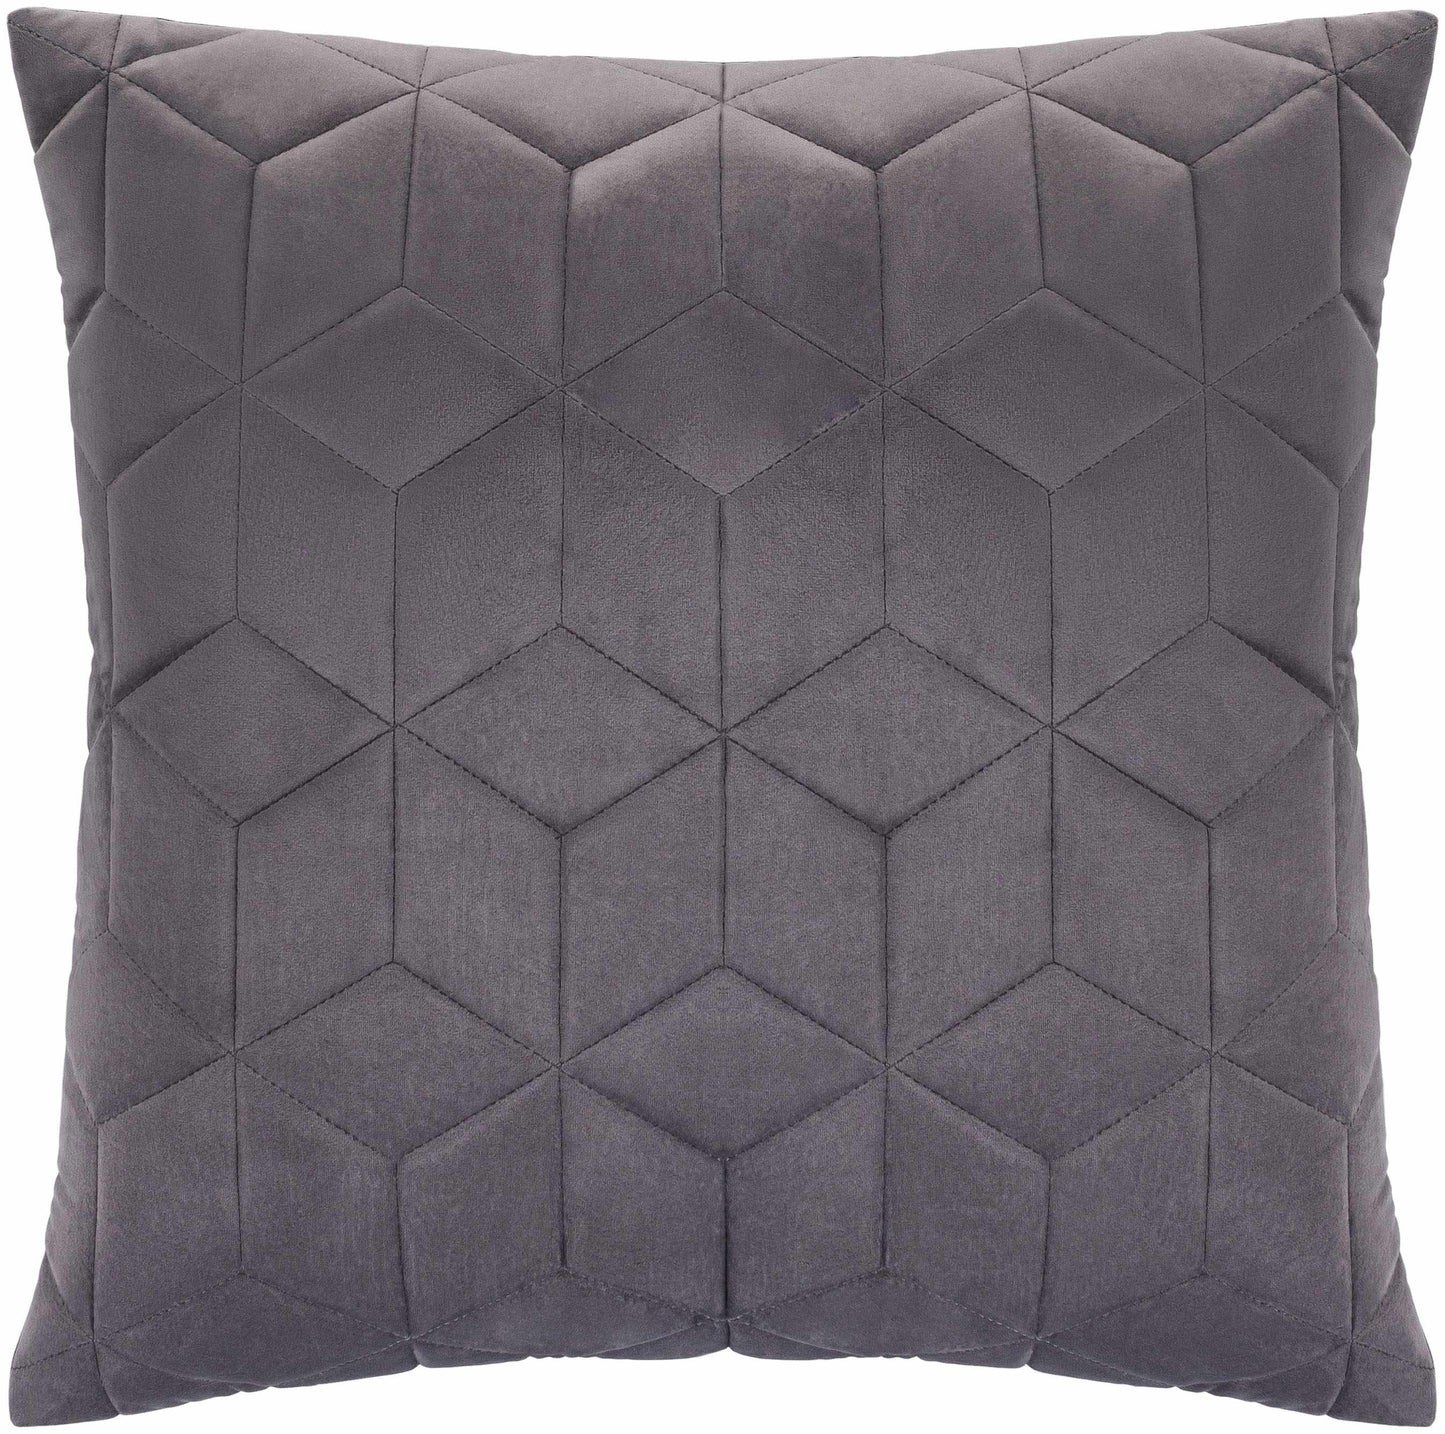 Hove Charcoal Pillow Cover